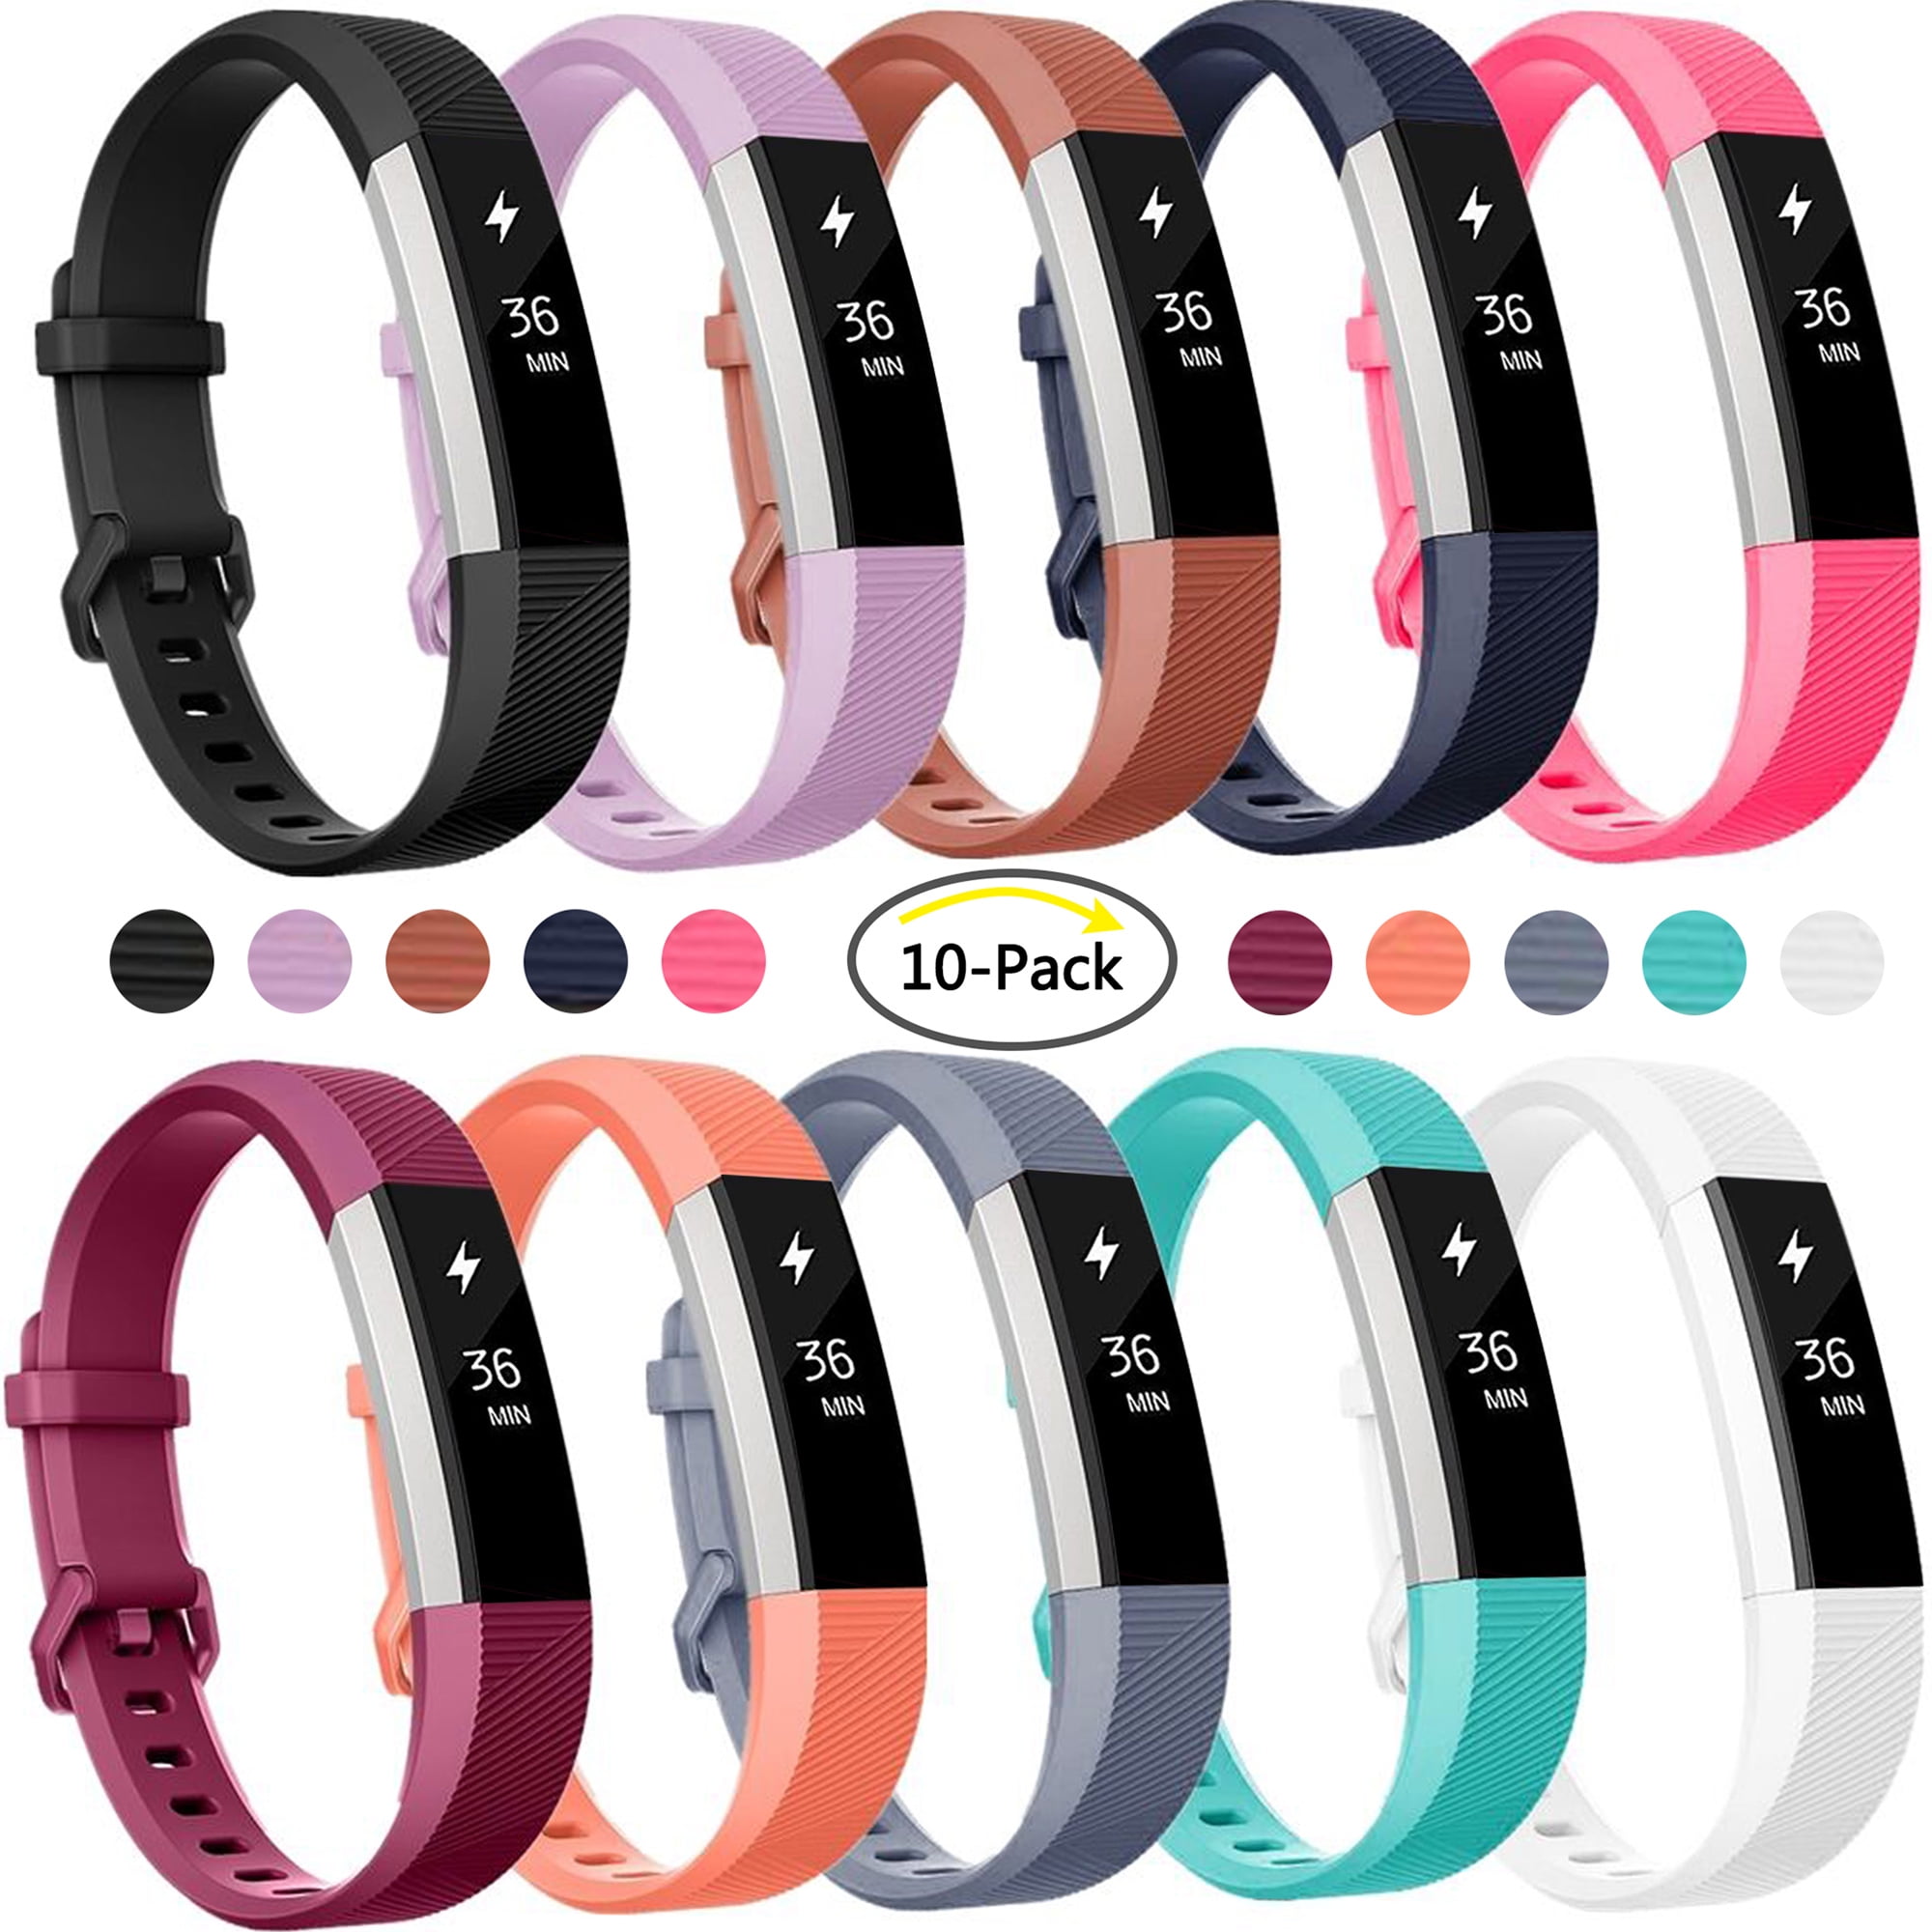 Large Fitbit Alta Wristband Black for sale online 